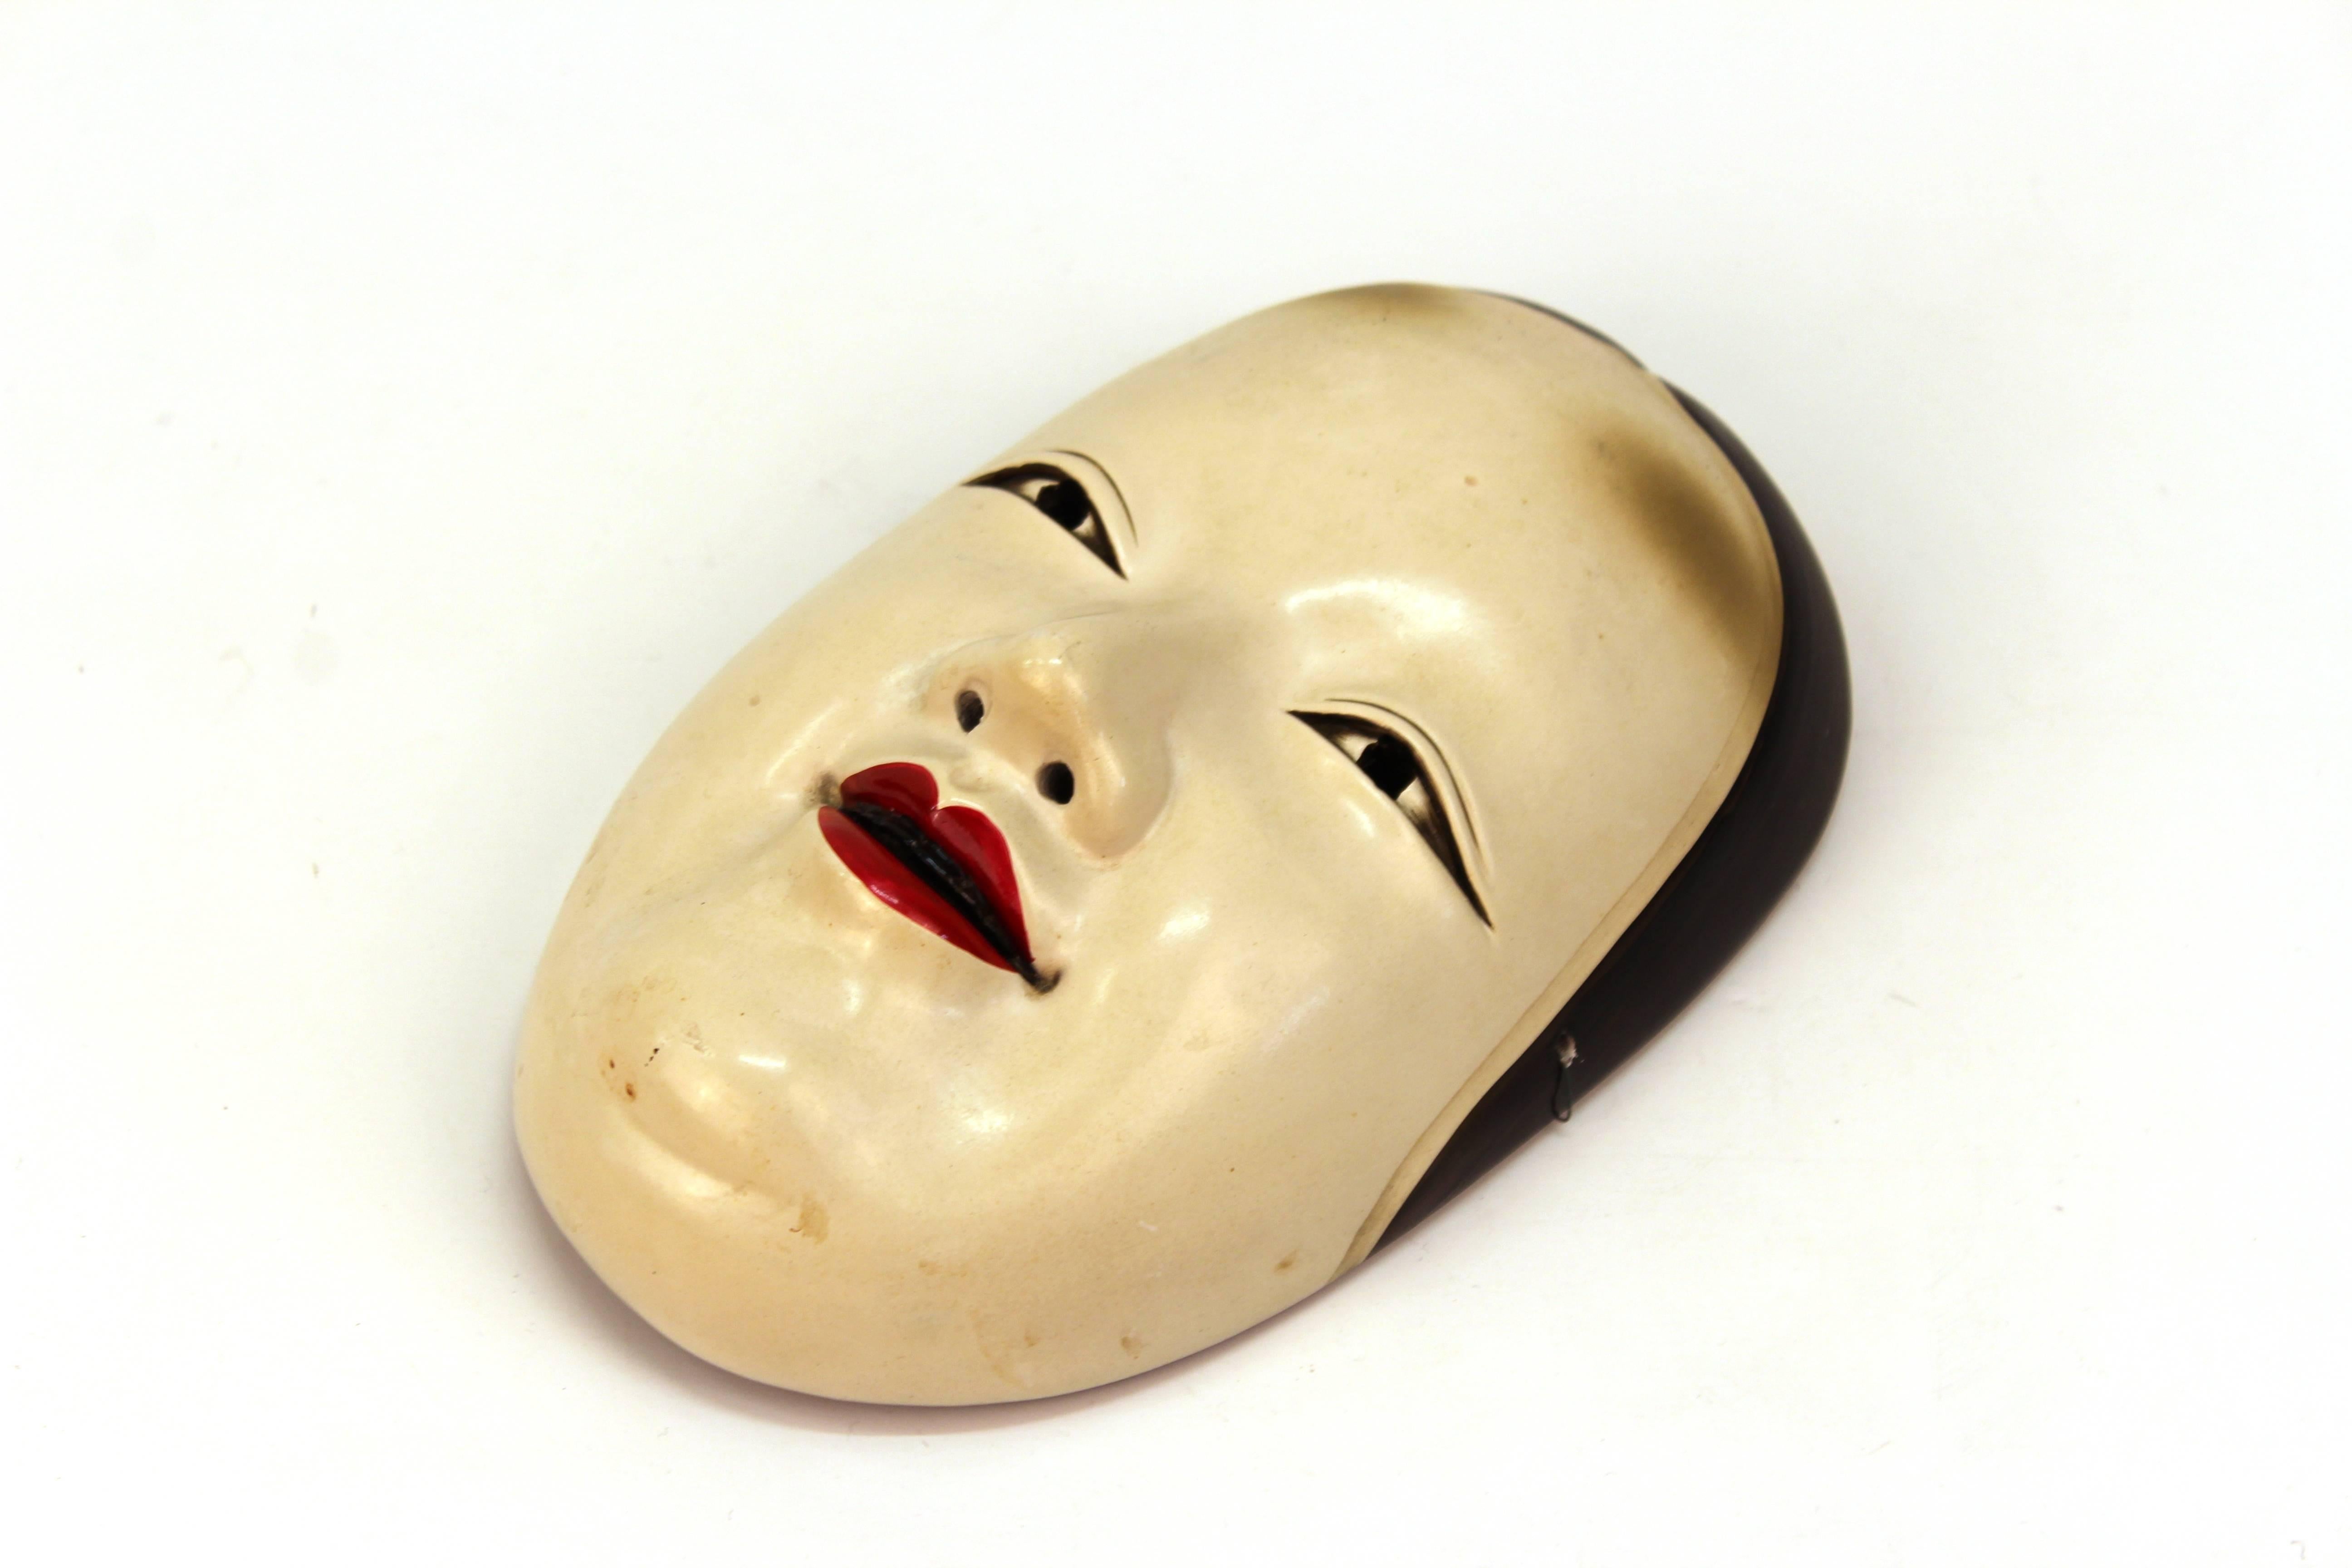 A Japanese Noh theatre sculpted wood mask of Ko-Omote, a young girl. The mask was crafted in the early 20th century and is in great vintage condition.